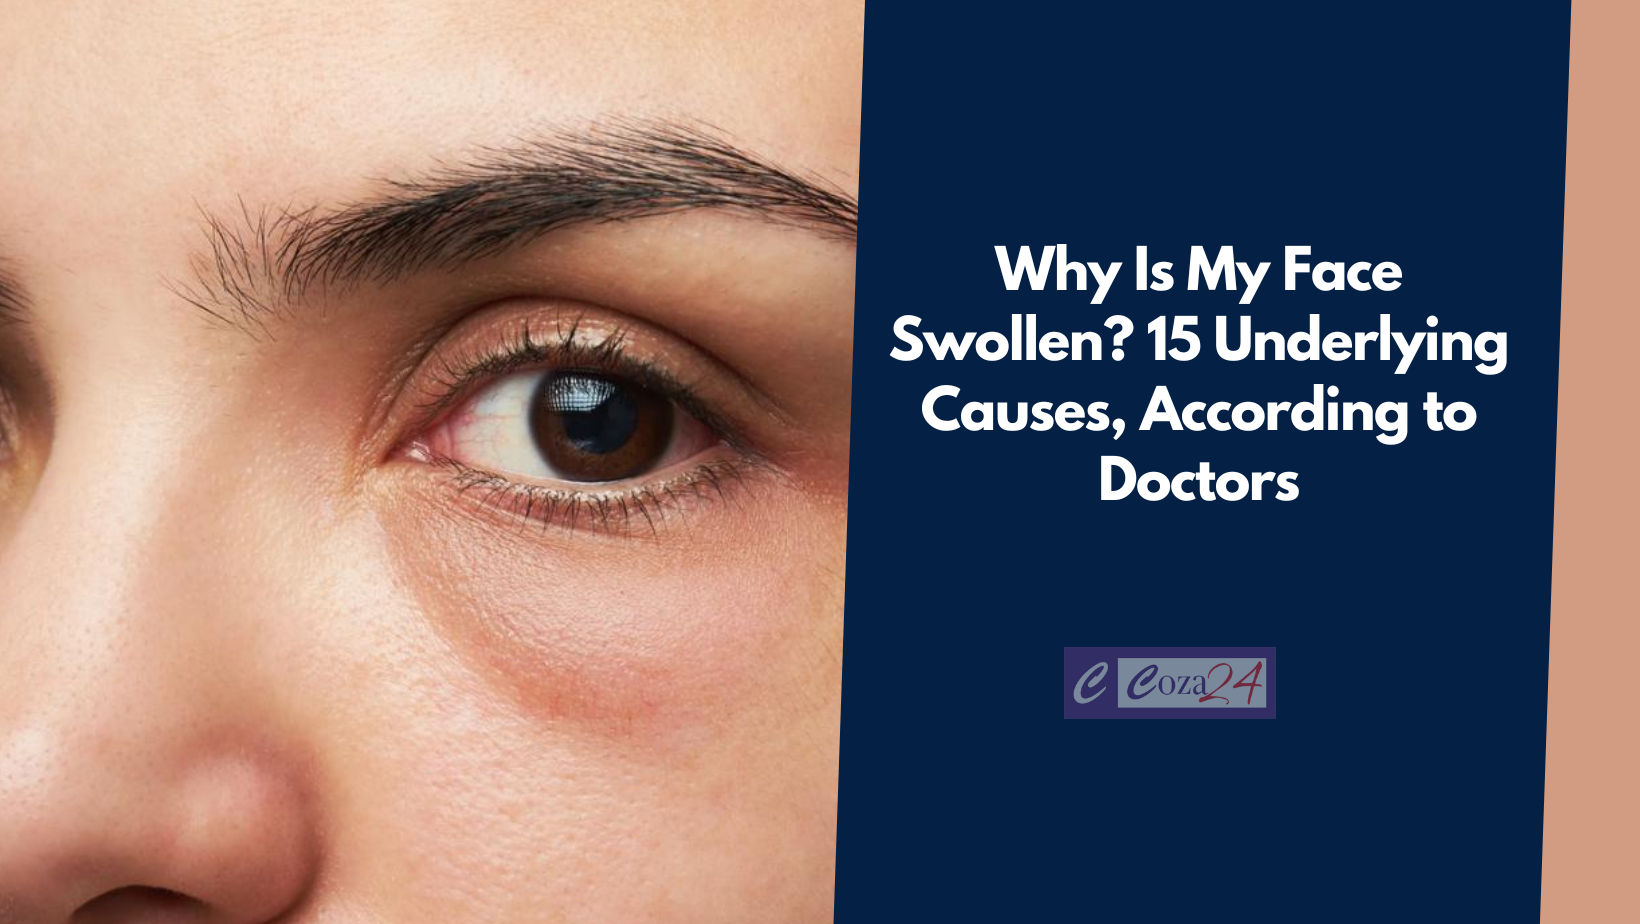 Why Is My Face Swollen? 15 Underlying Causes, According to Doctors